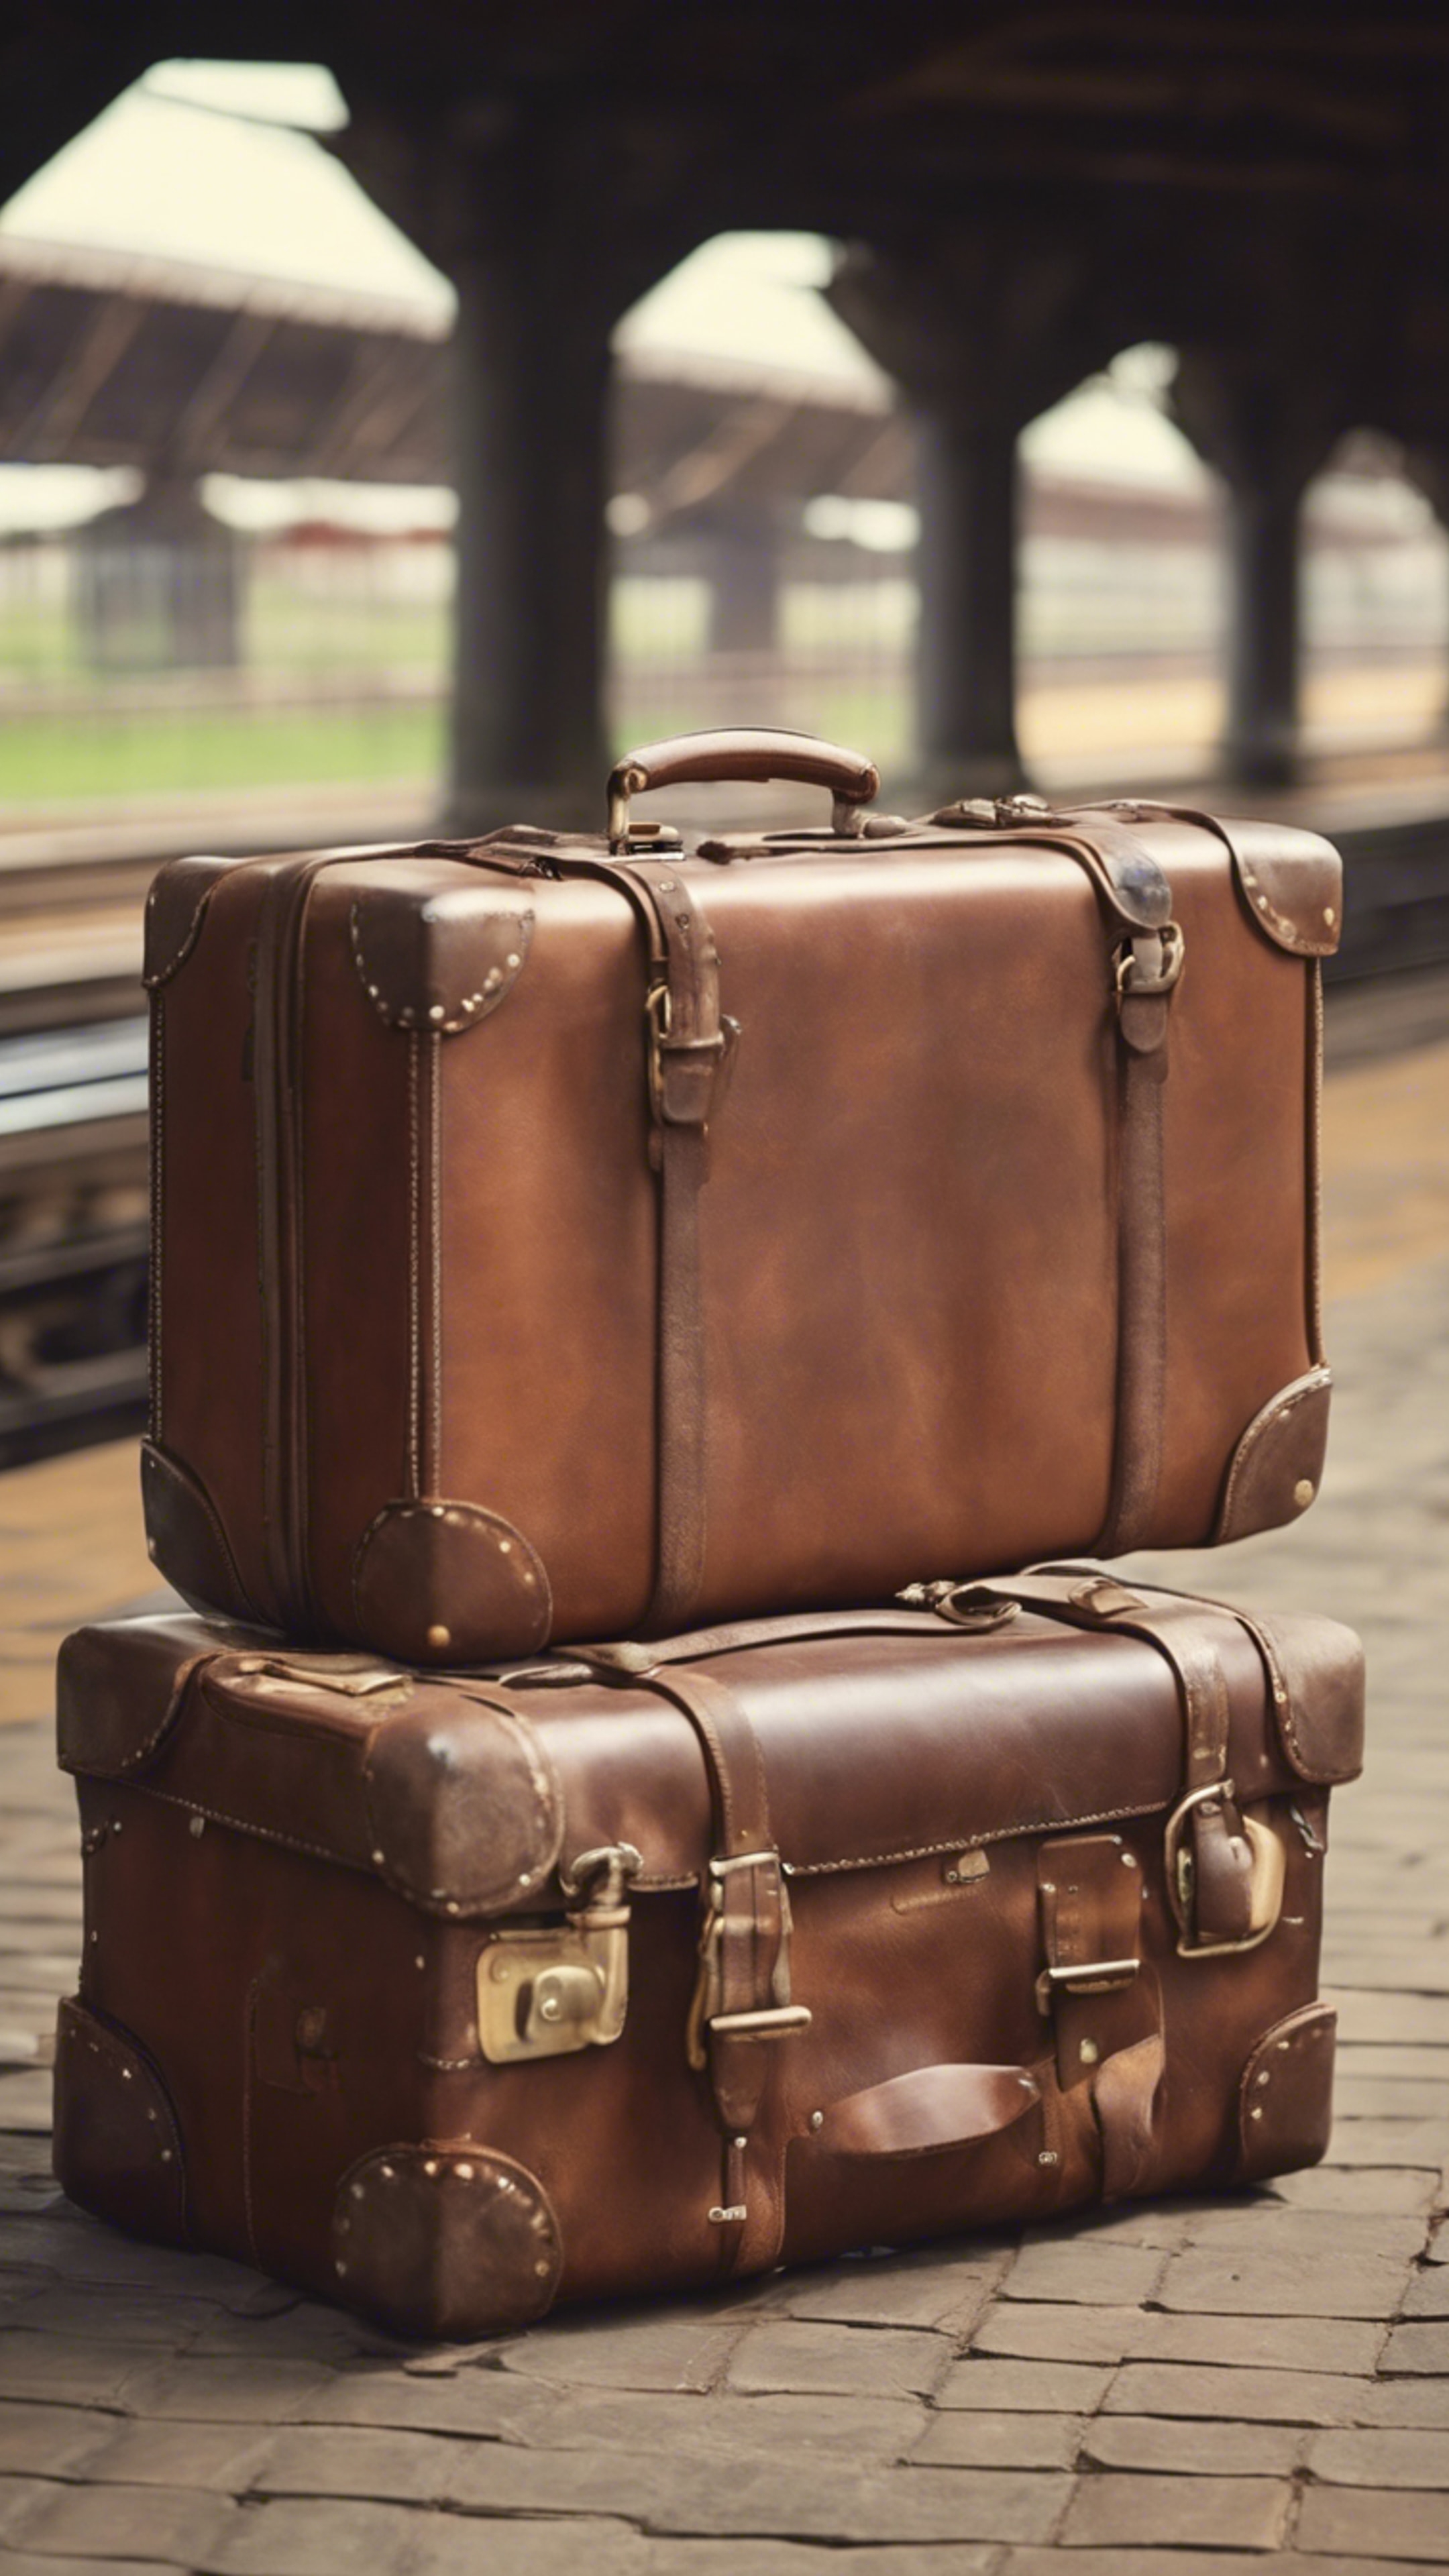 A rustic brown leather suitcase with travel tags, sitting at a quaint railway station. Sfondo[6b7e956de06740cdbd0e]